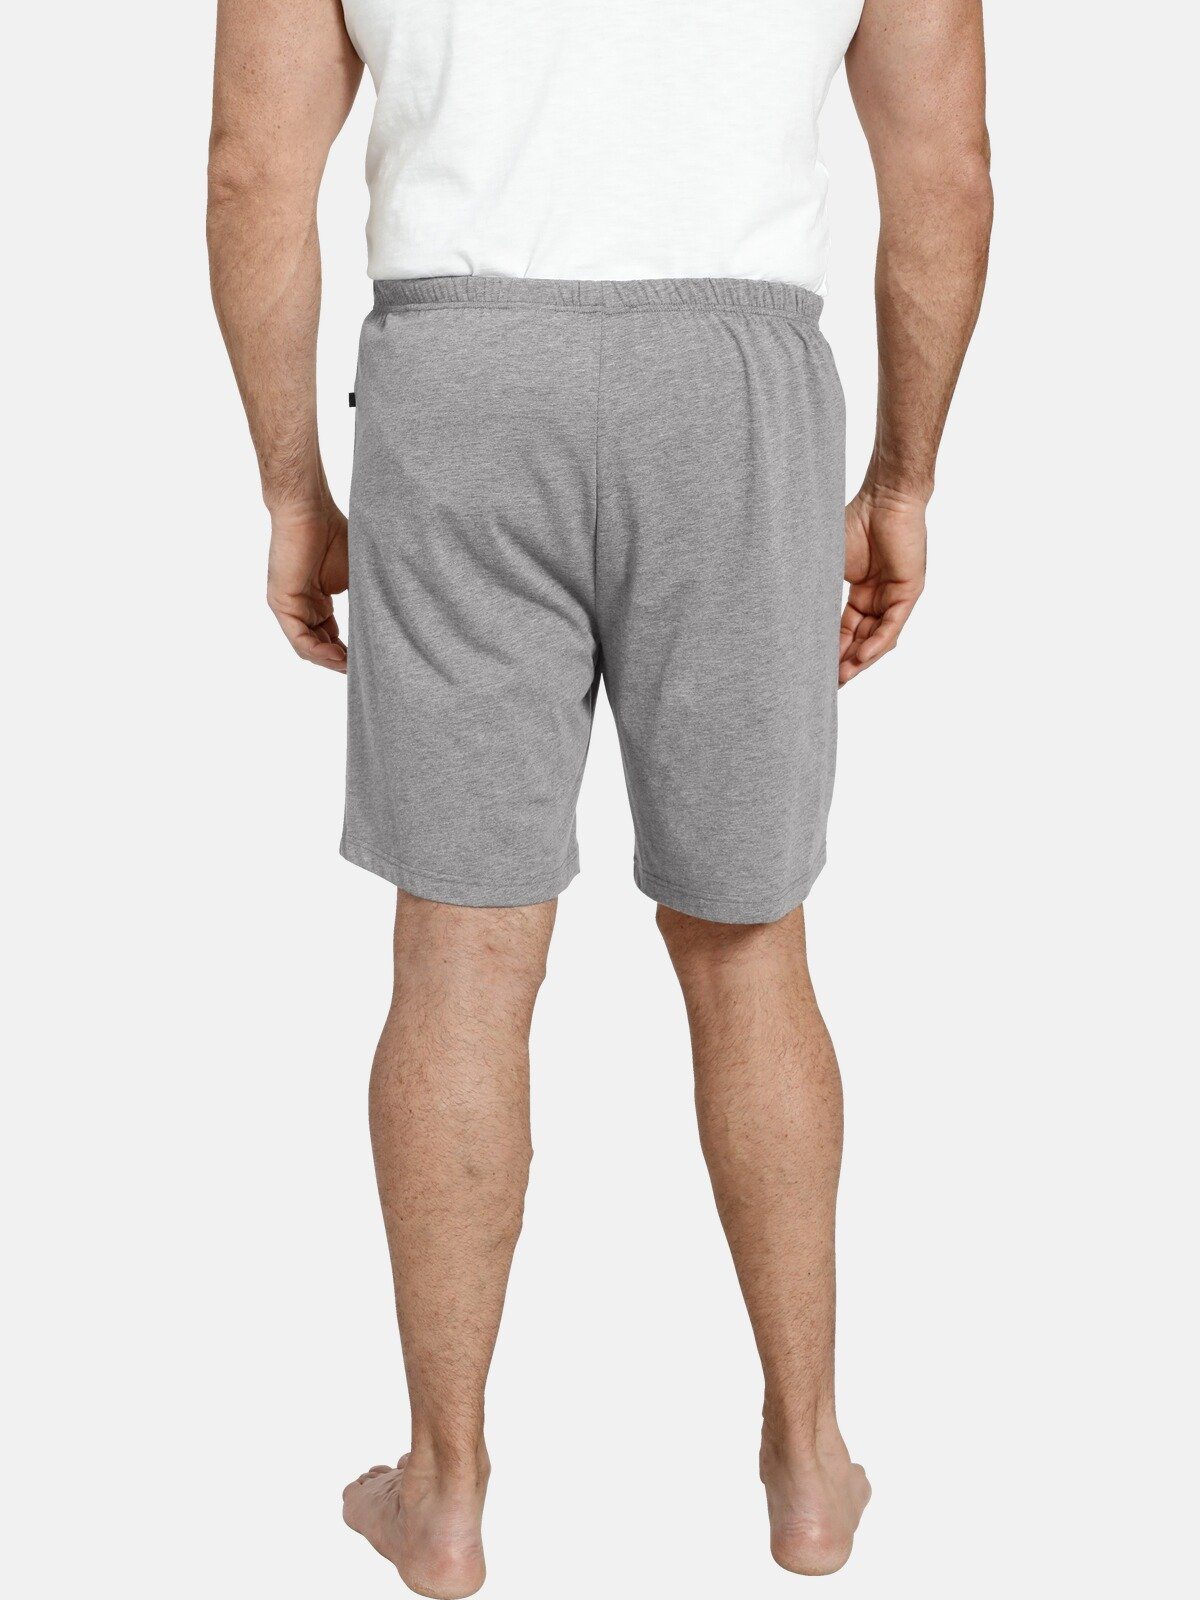 Schlafhose Relaxshorts LORD Charles leichte MYCROFT bequeme hellgrau Colby